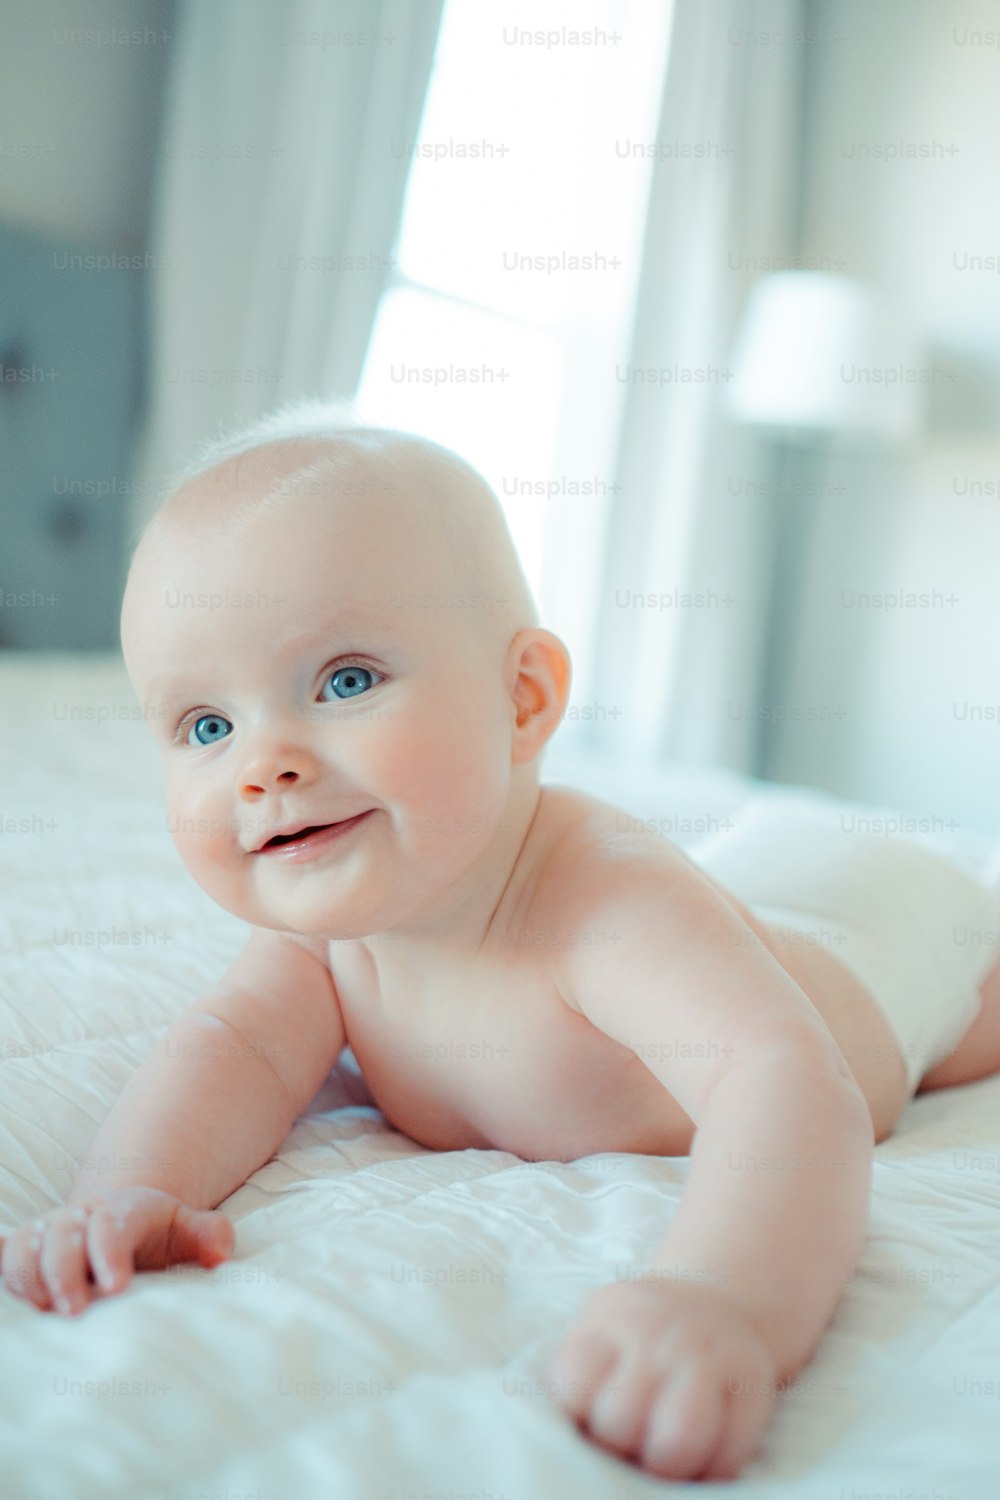 Cute Babies Pictures | Download Free Images on Unsplash